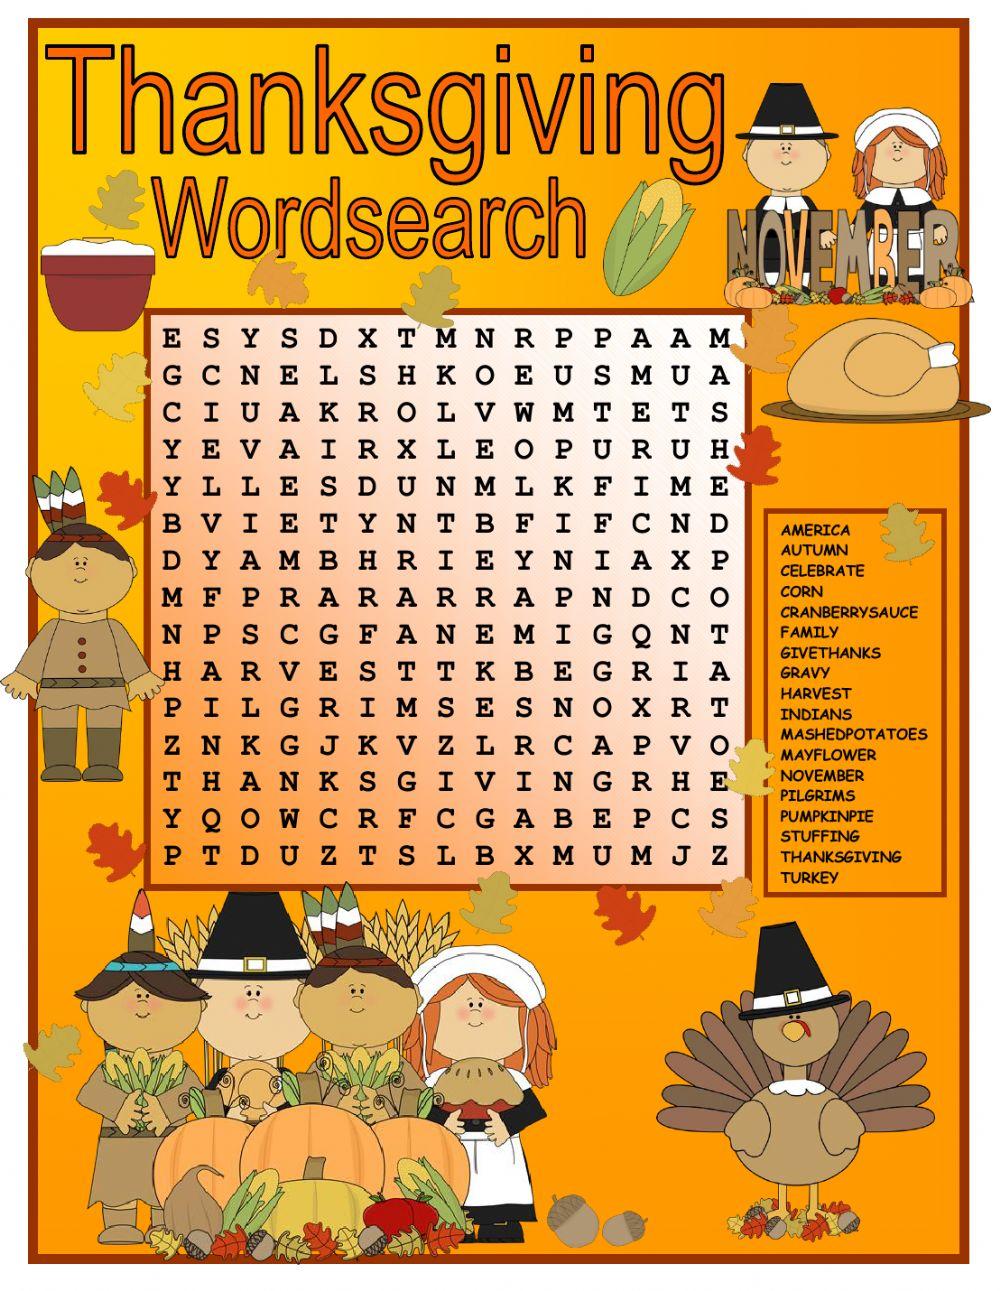 Thanksgiving Wordsearch